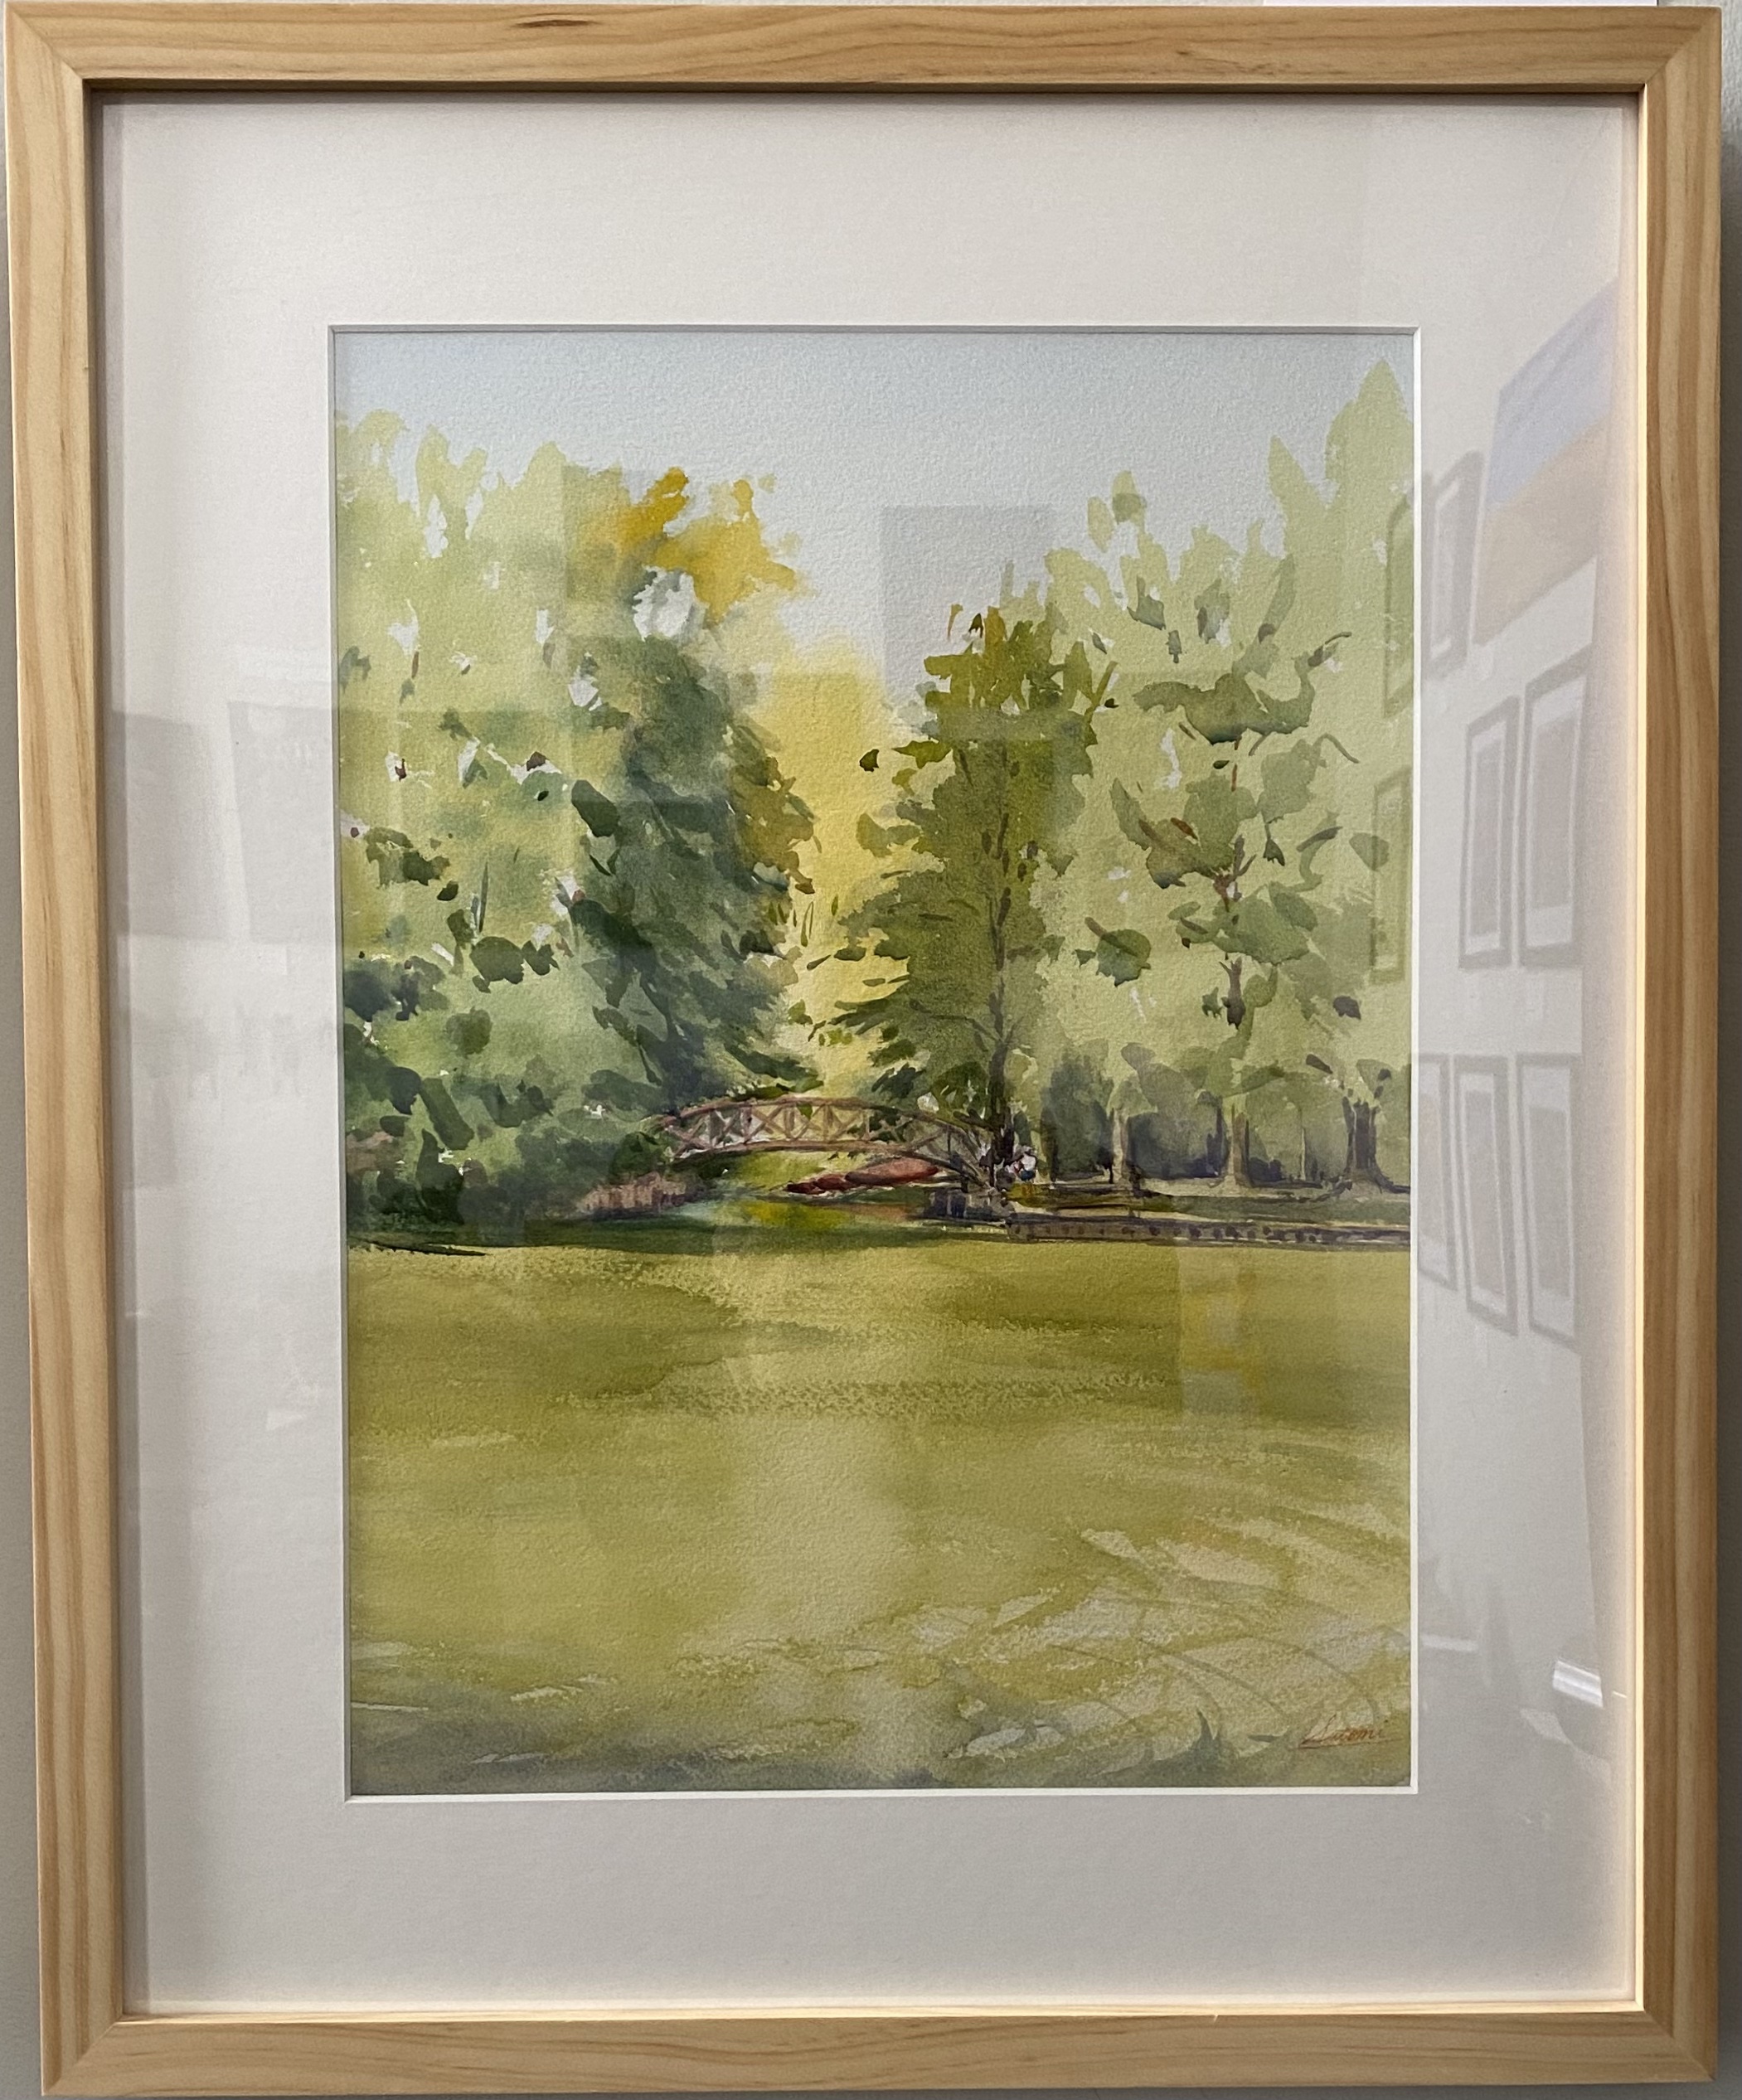 Lake of the Woods
Watercolor
 11.5" X 15"
$225.